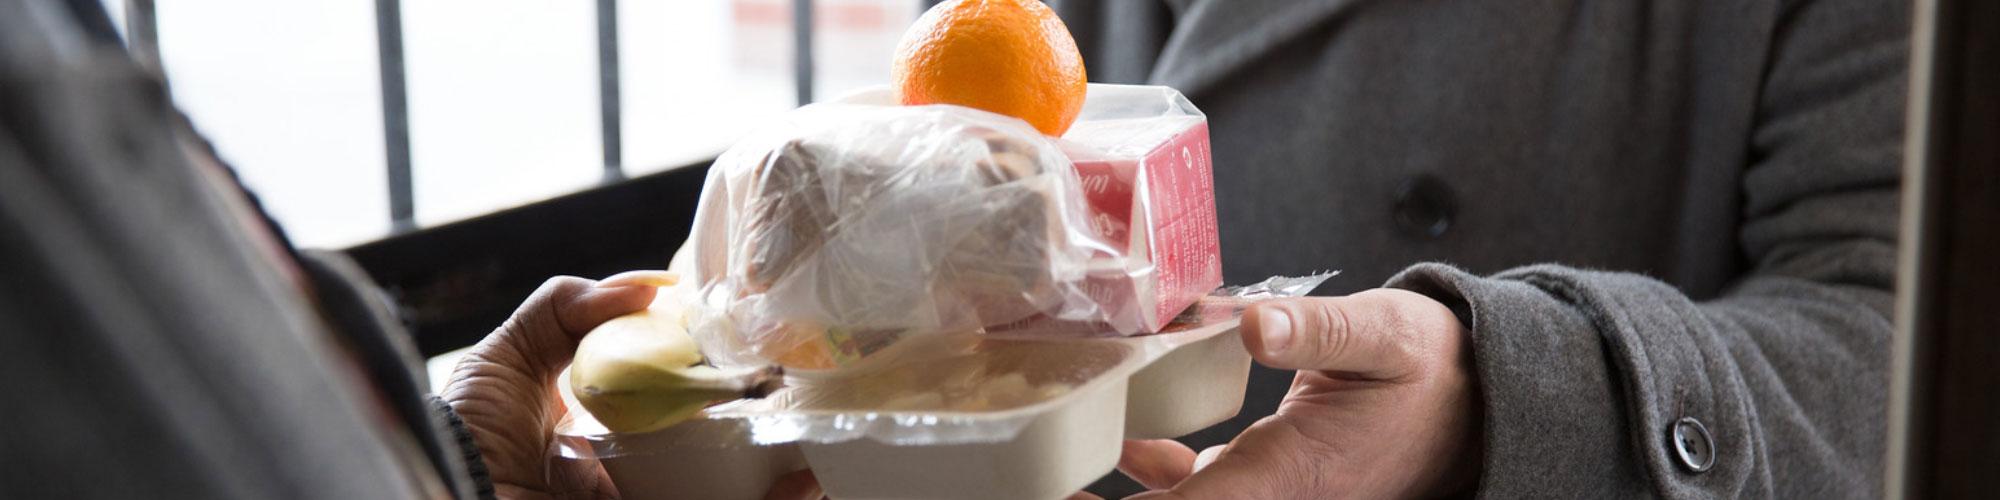 person delivering to a senior a meal with orange and milk and other food